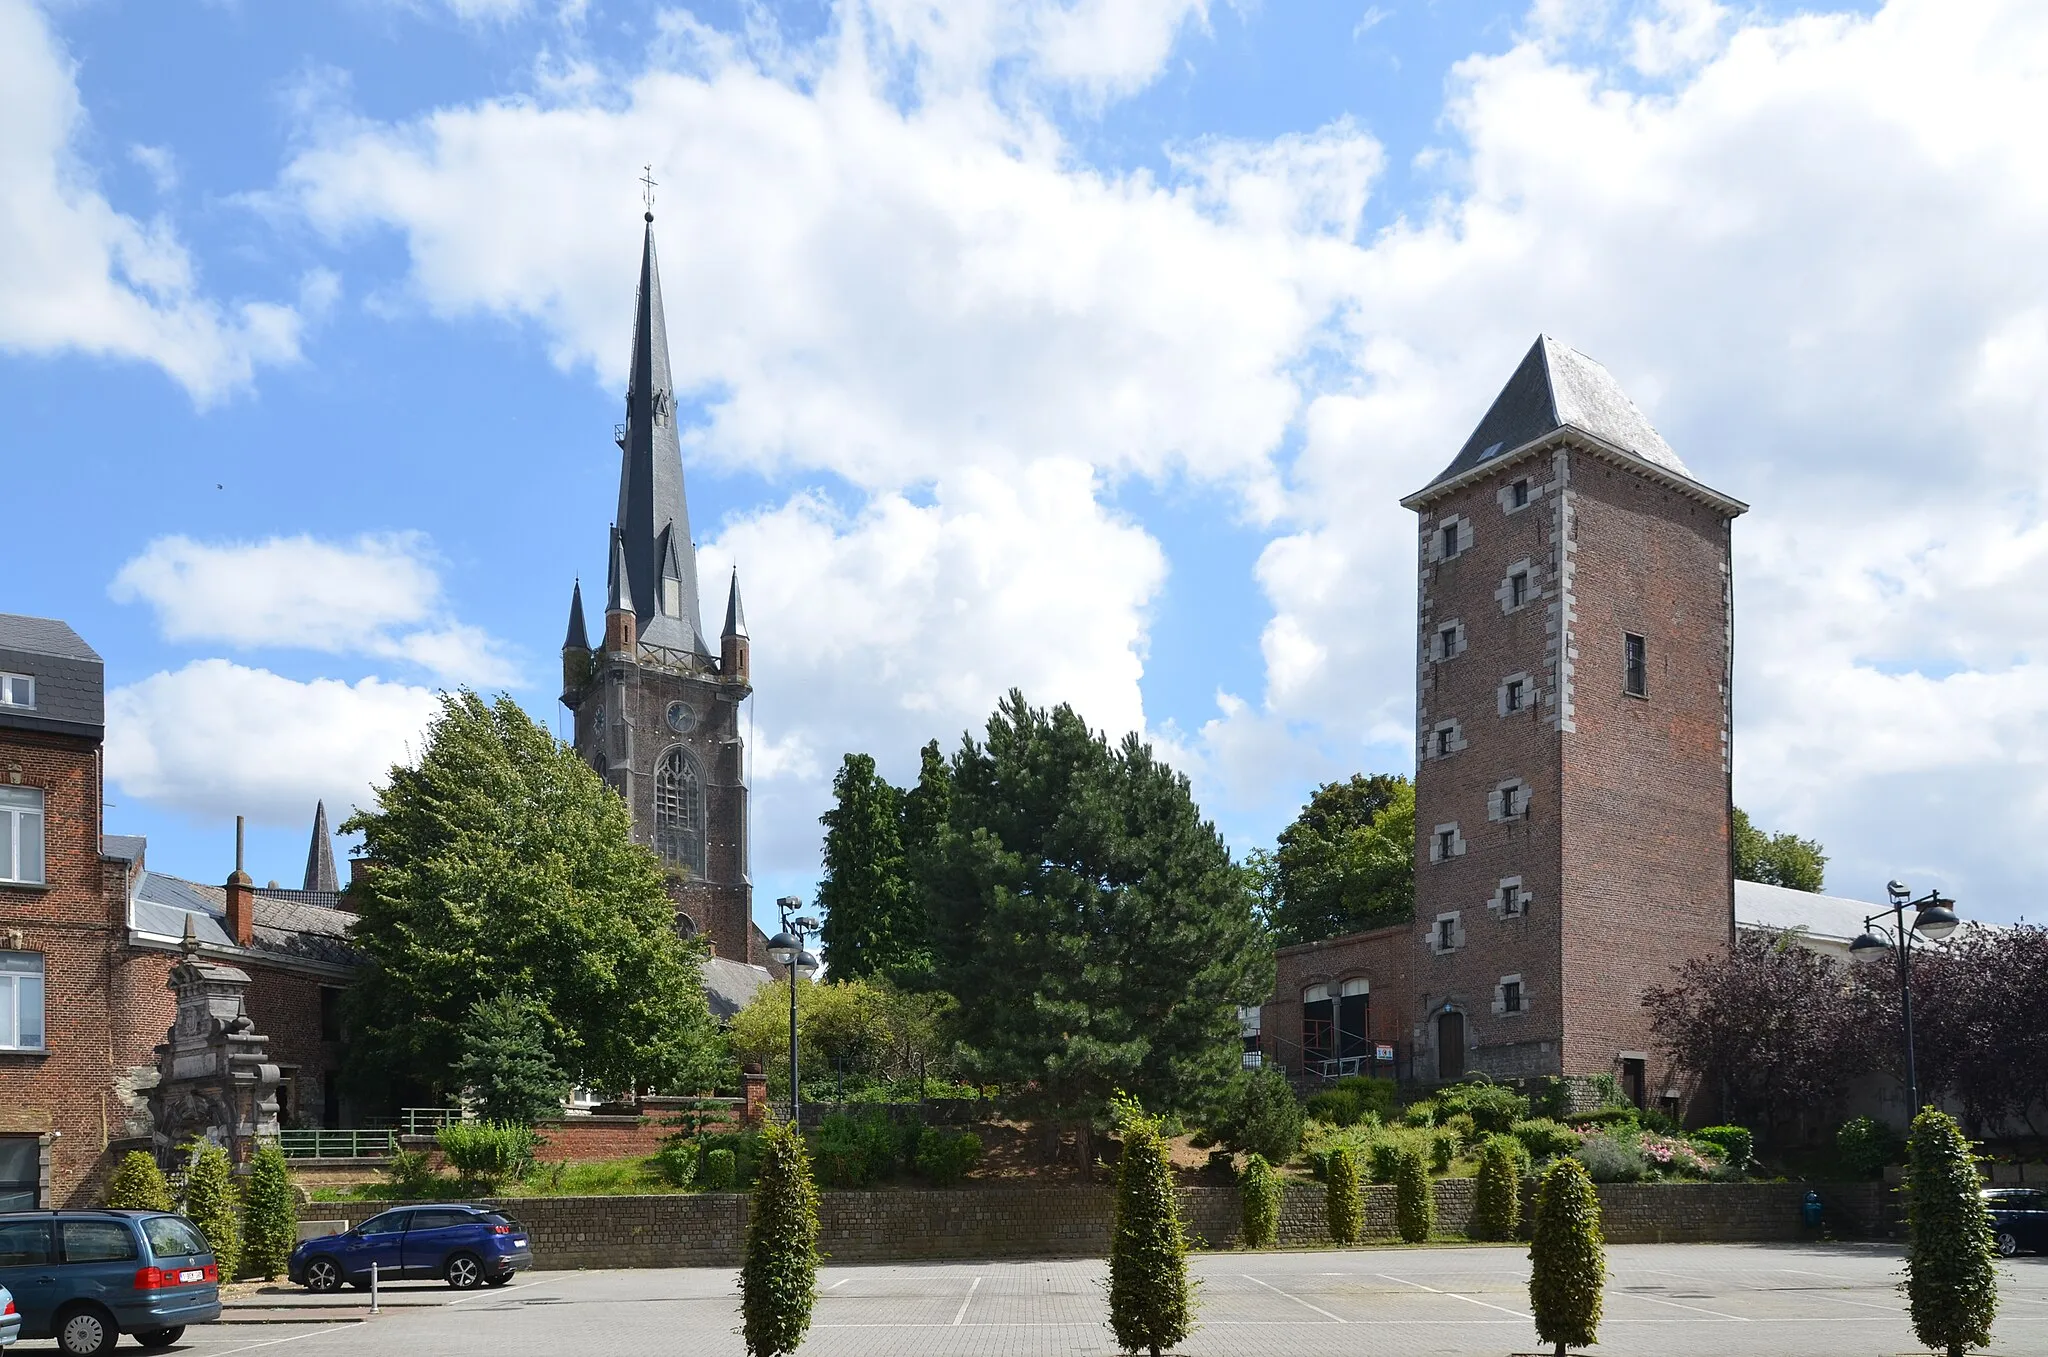 Photo showing: Gosselies (Charleroi-Belgium) - Tower of the Saint-Jean-Baptiste church and the tower of the old castle.